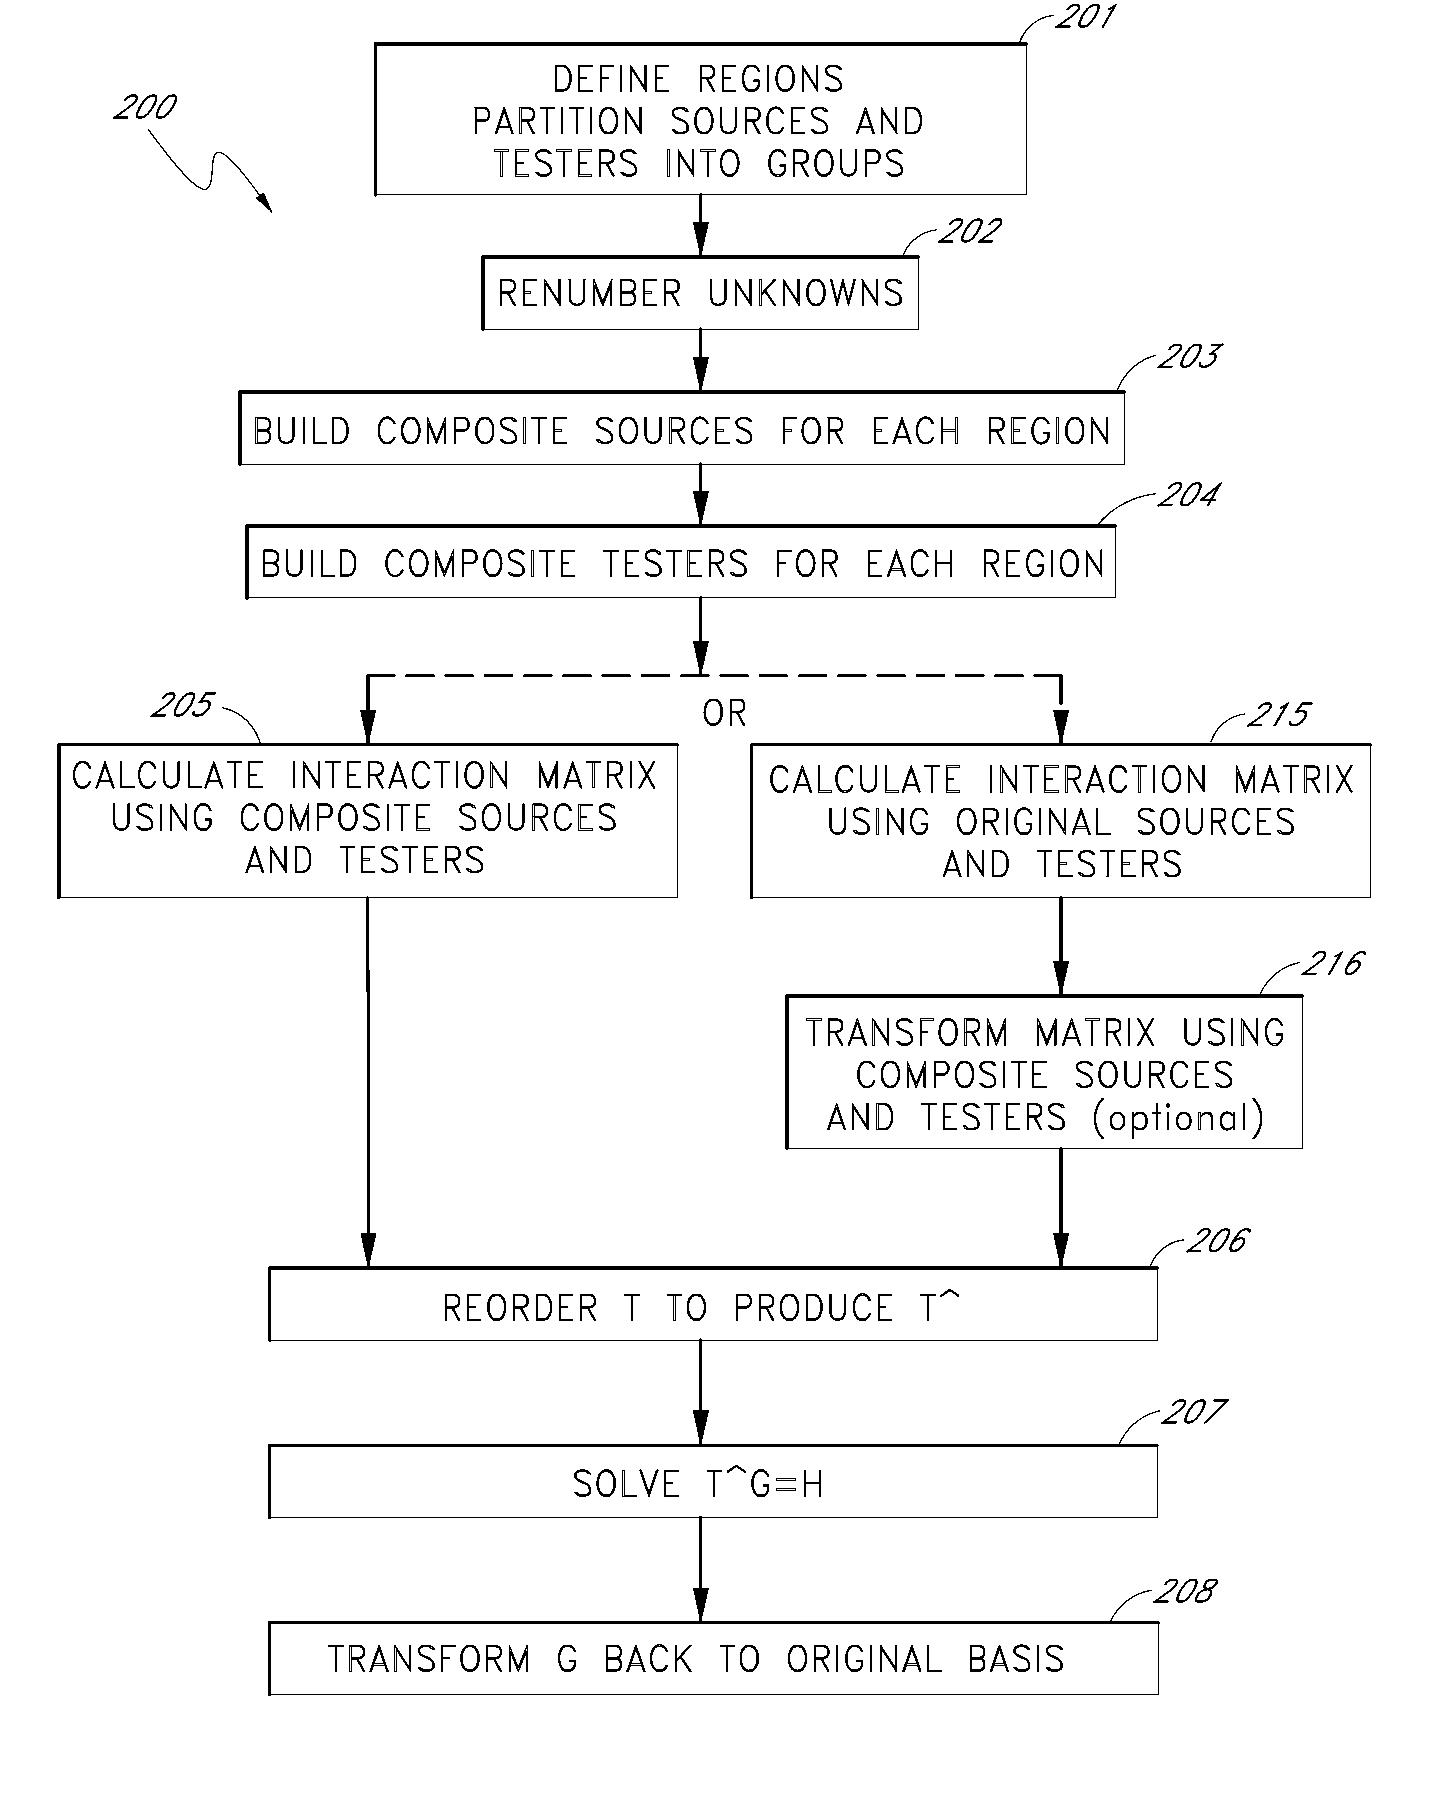 Compression of interaction data using directional sources and/or testers